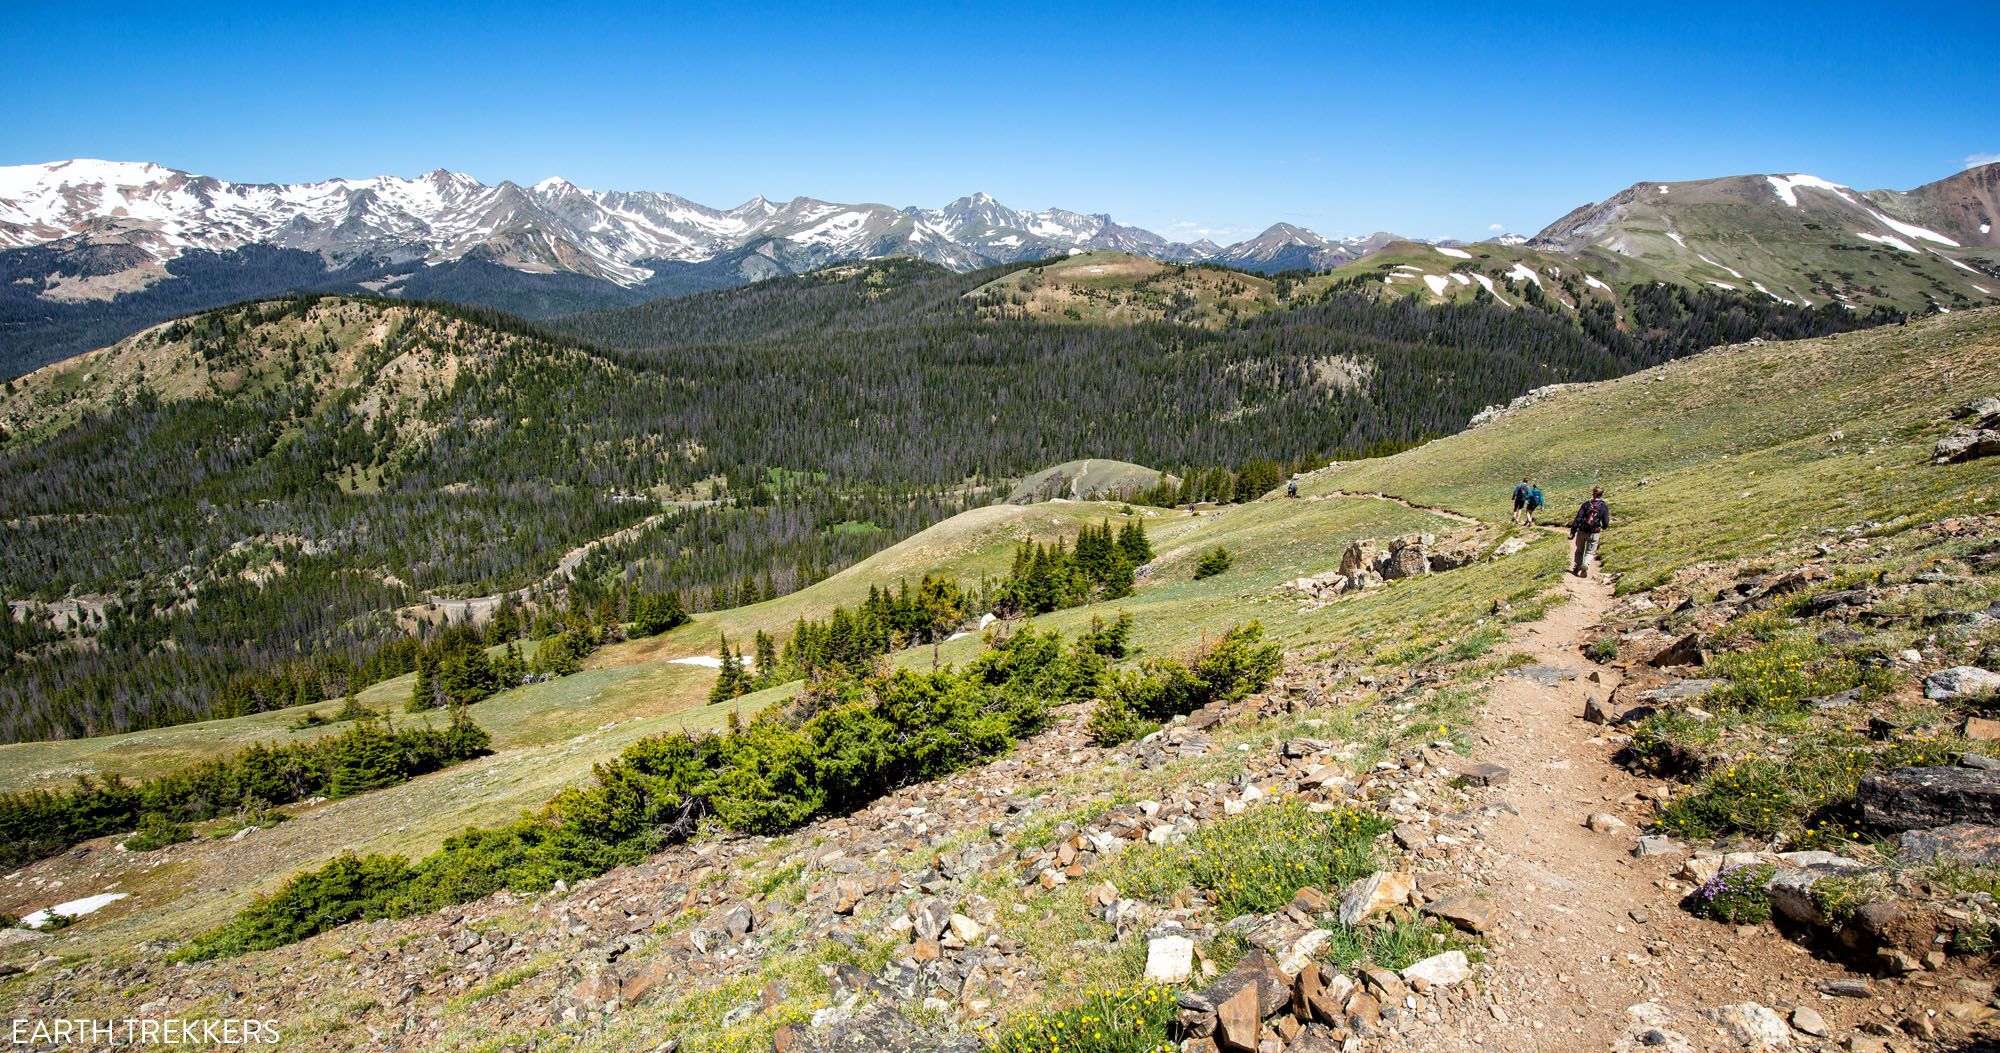 Featured image for “How to Hike the Continental Divide Trail to Mt Ida, RMNP”